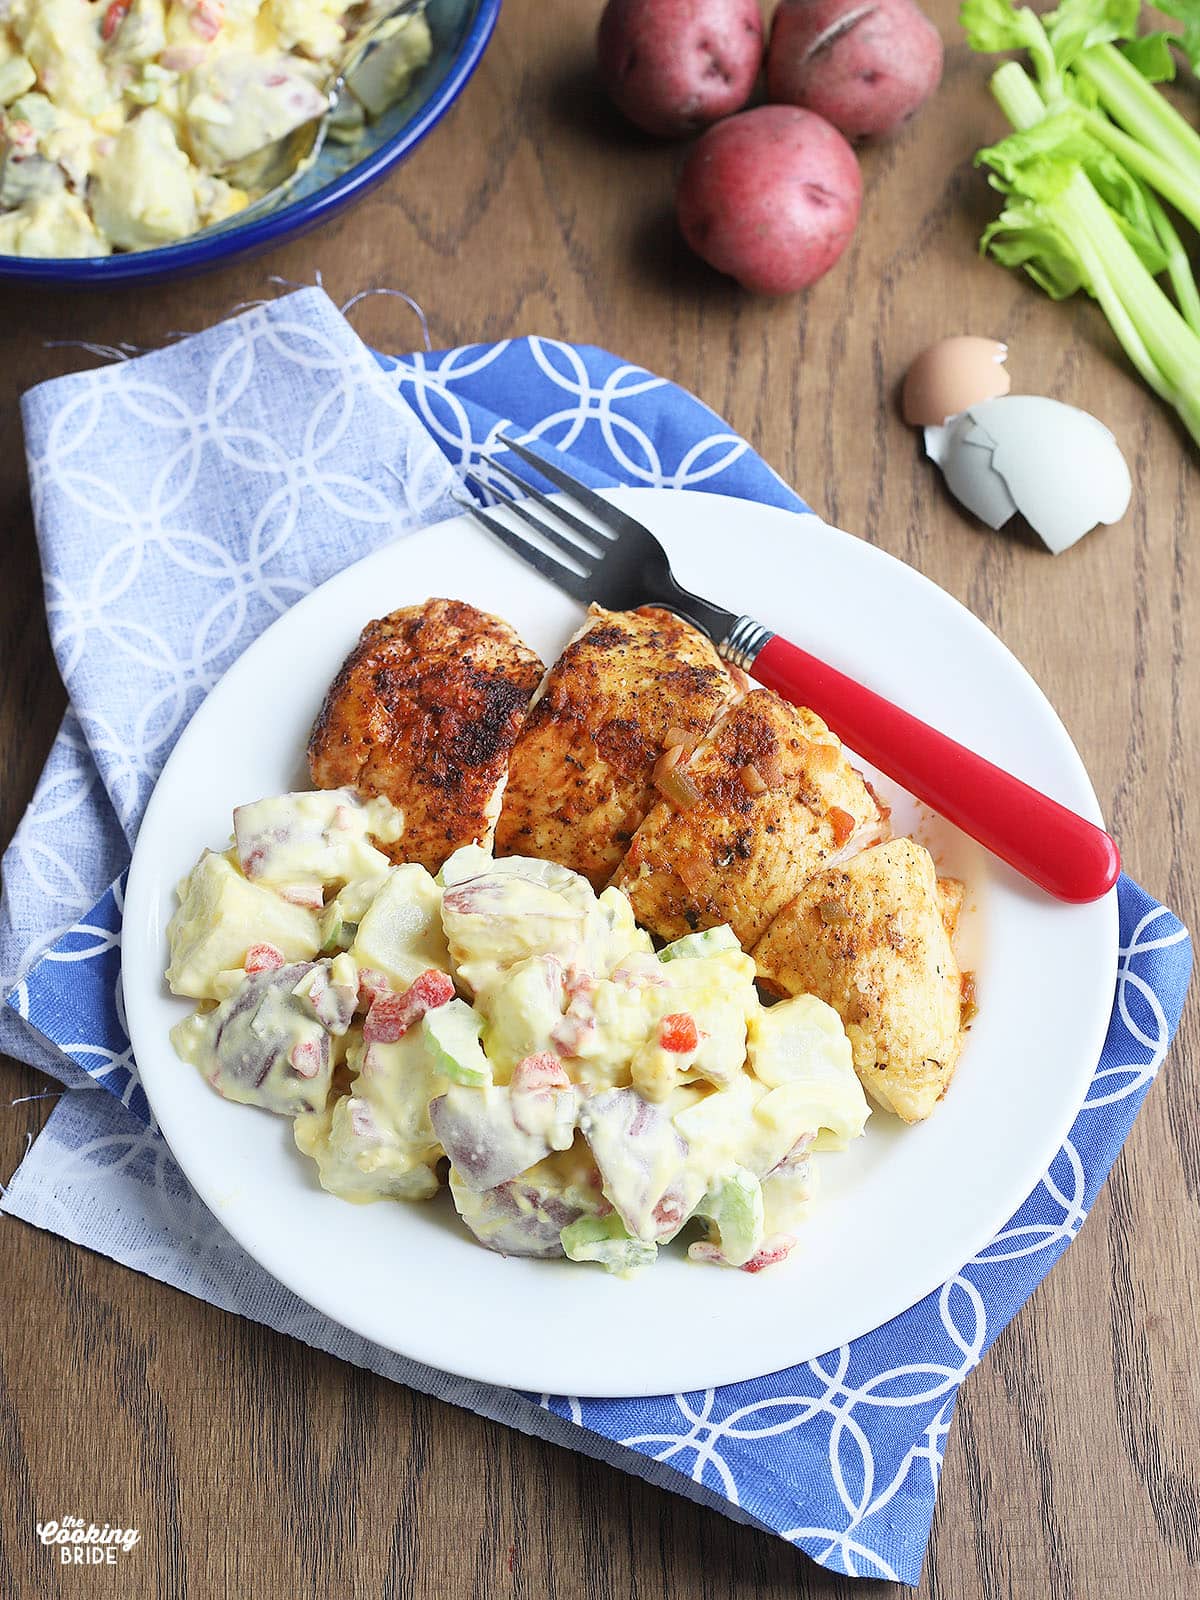 helping of potato salad on a white plate with a serving of roast chicken, a red fork and a blue and white napkin